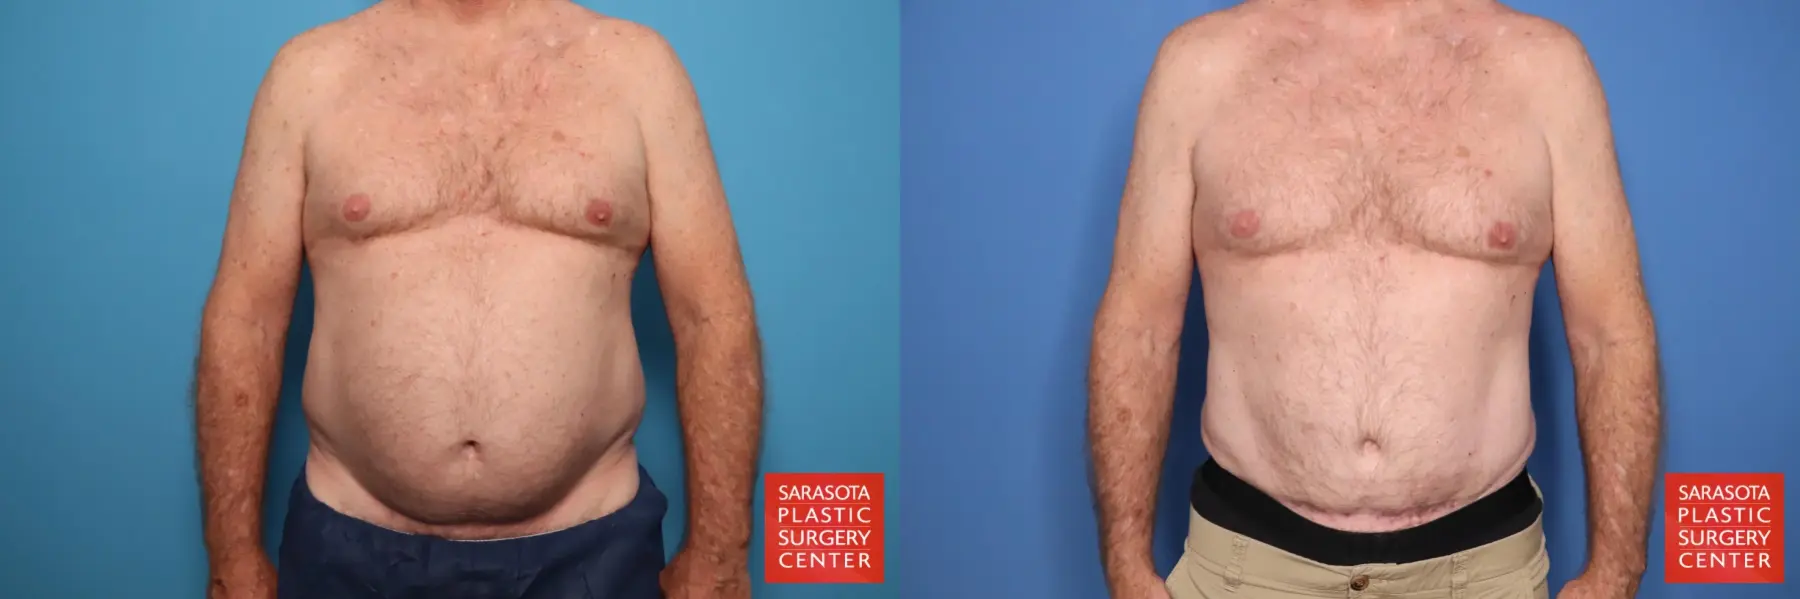 Tummy Tuck With Mesh: Patient 2 - Before and After  